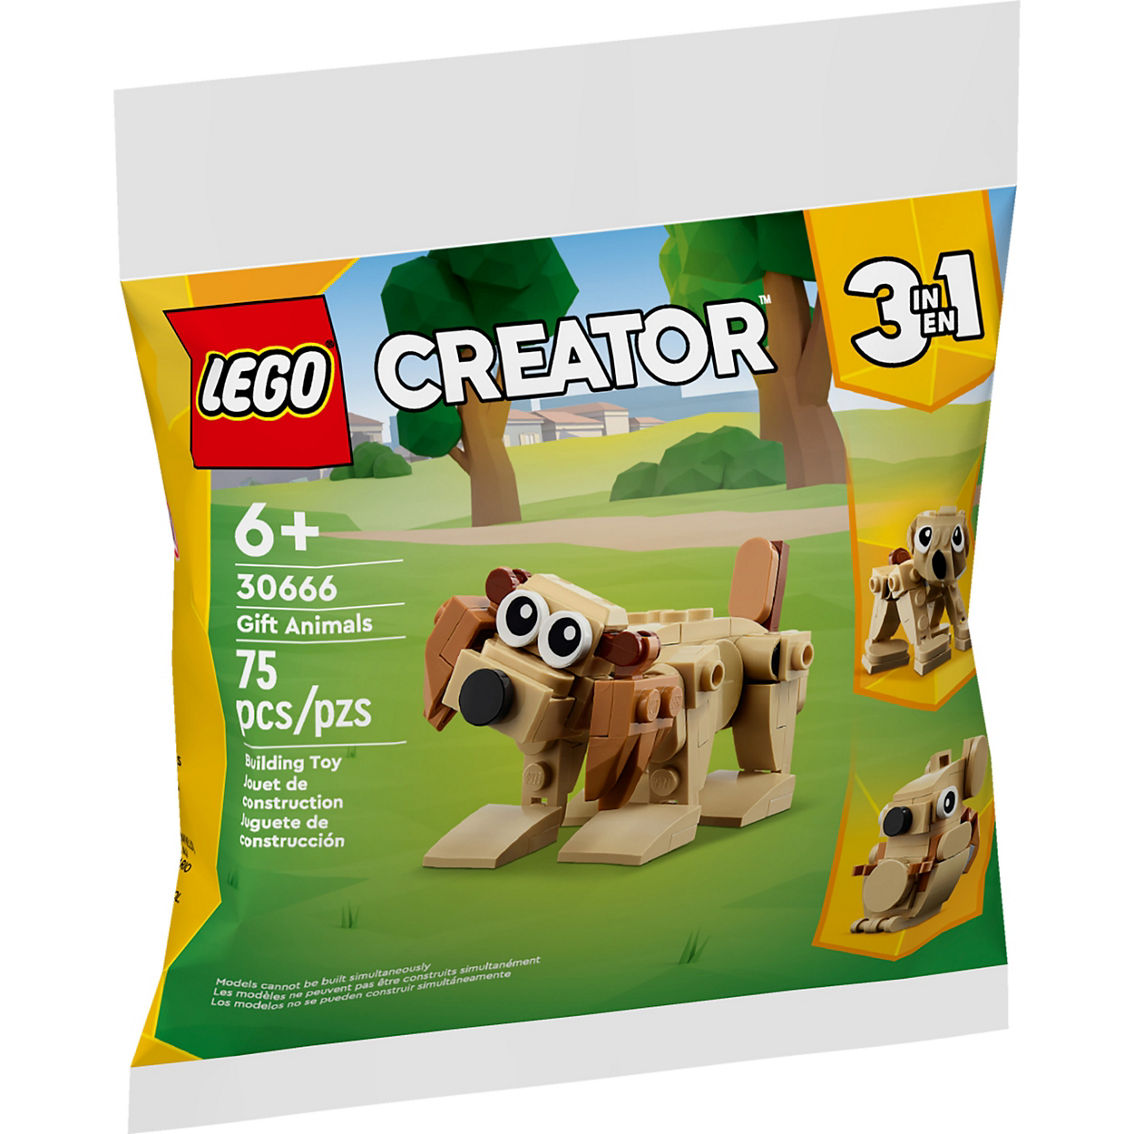 LEGO Creator 3-in-1 Gift Animals 30666 - Image 2 of 3